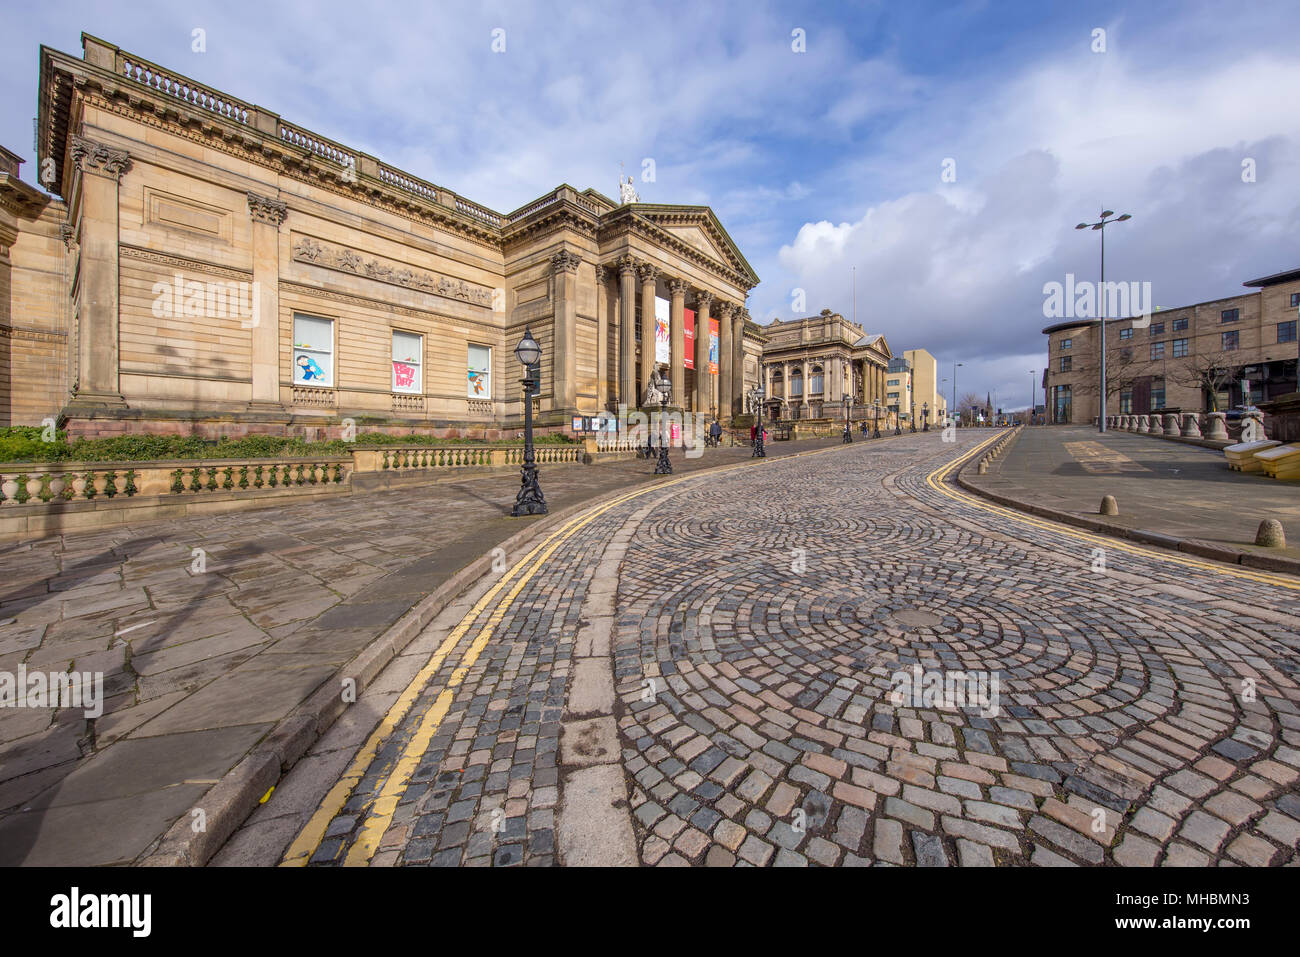 The Walker Gallery (foreground) & the County Sessions House (background) are part of the huge civic row of grand Liverpool buildings Stock Photo